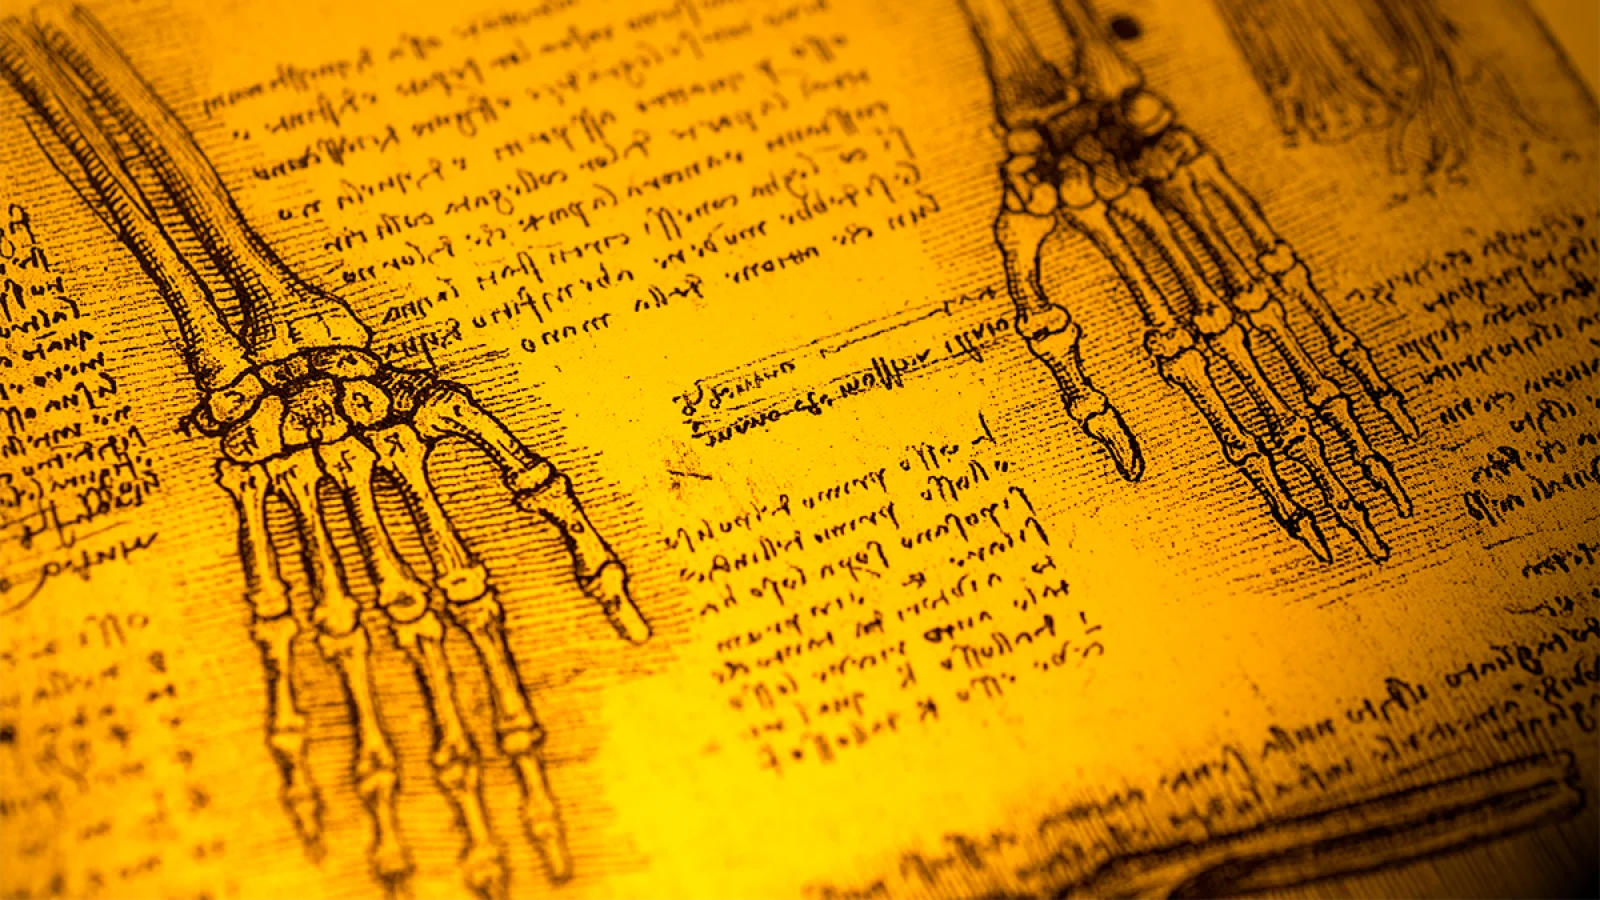 Medical drawings of bones in the hands and arms with text in the background in Middle Eastern language